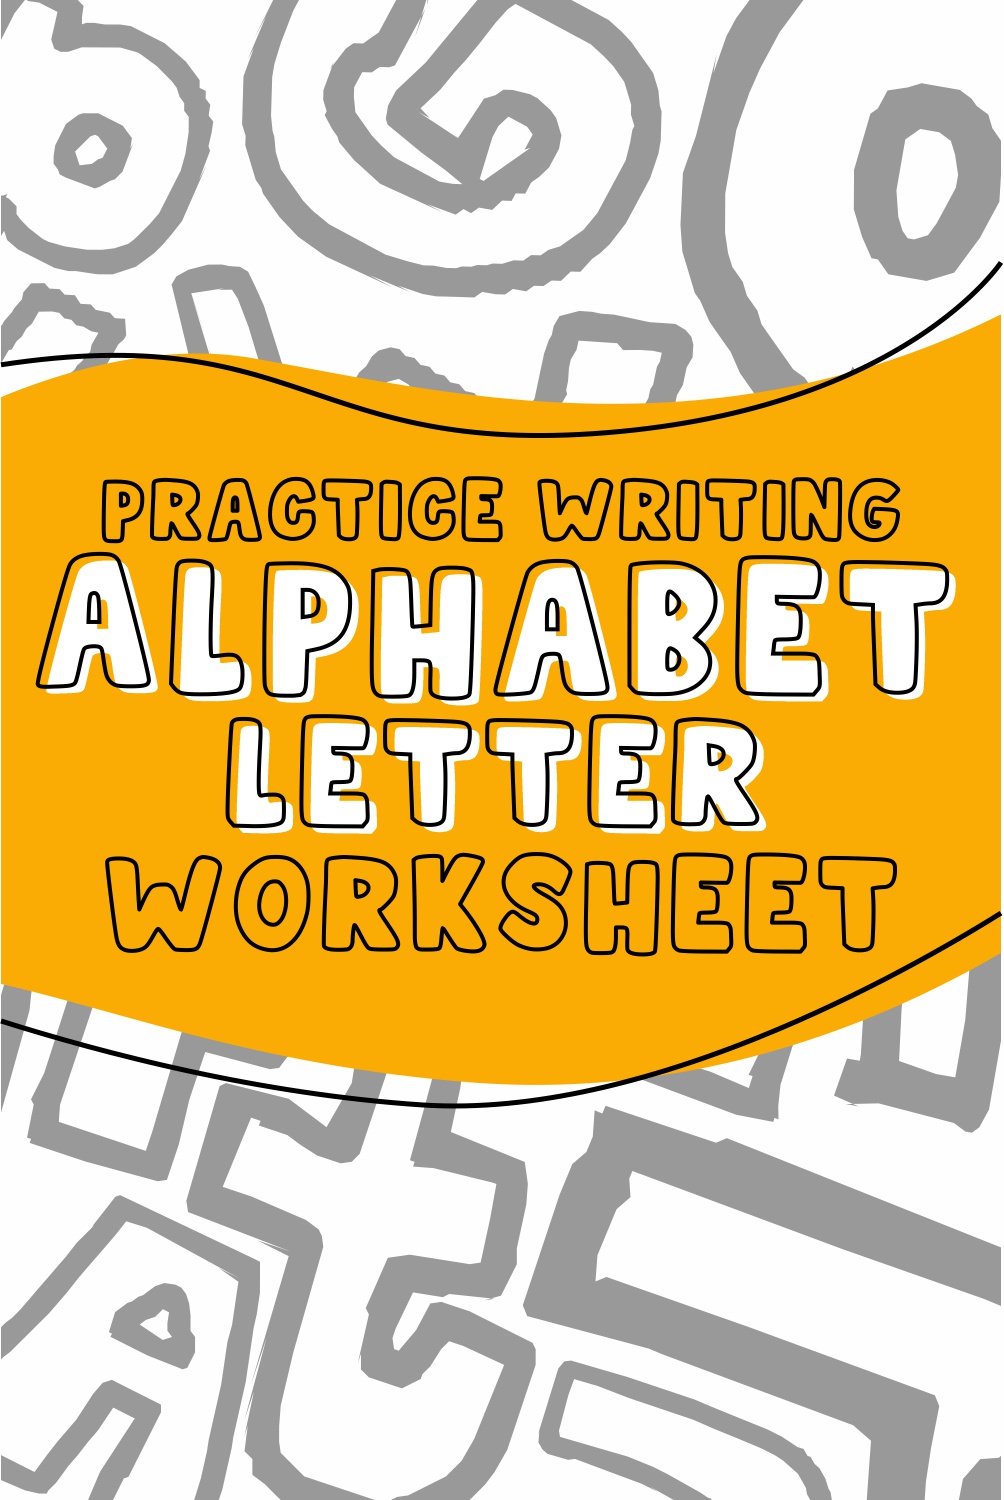 14 Images of Practice Writing Alphabet Letter Worksheets